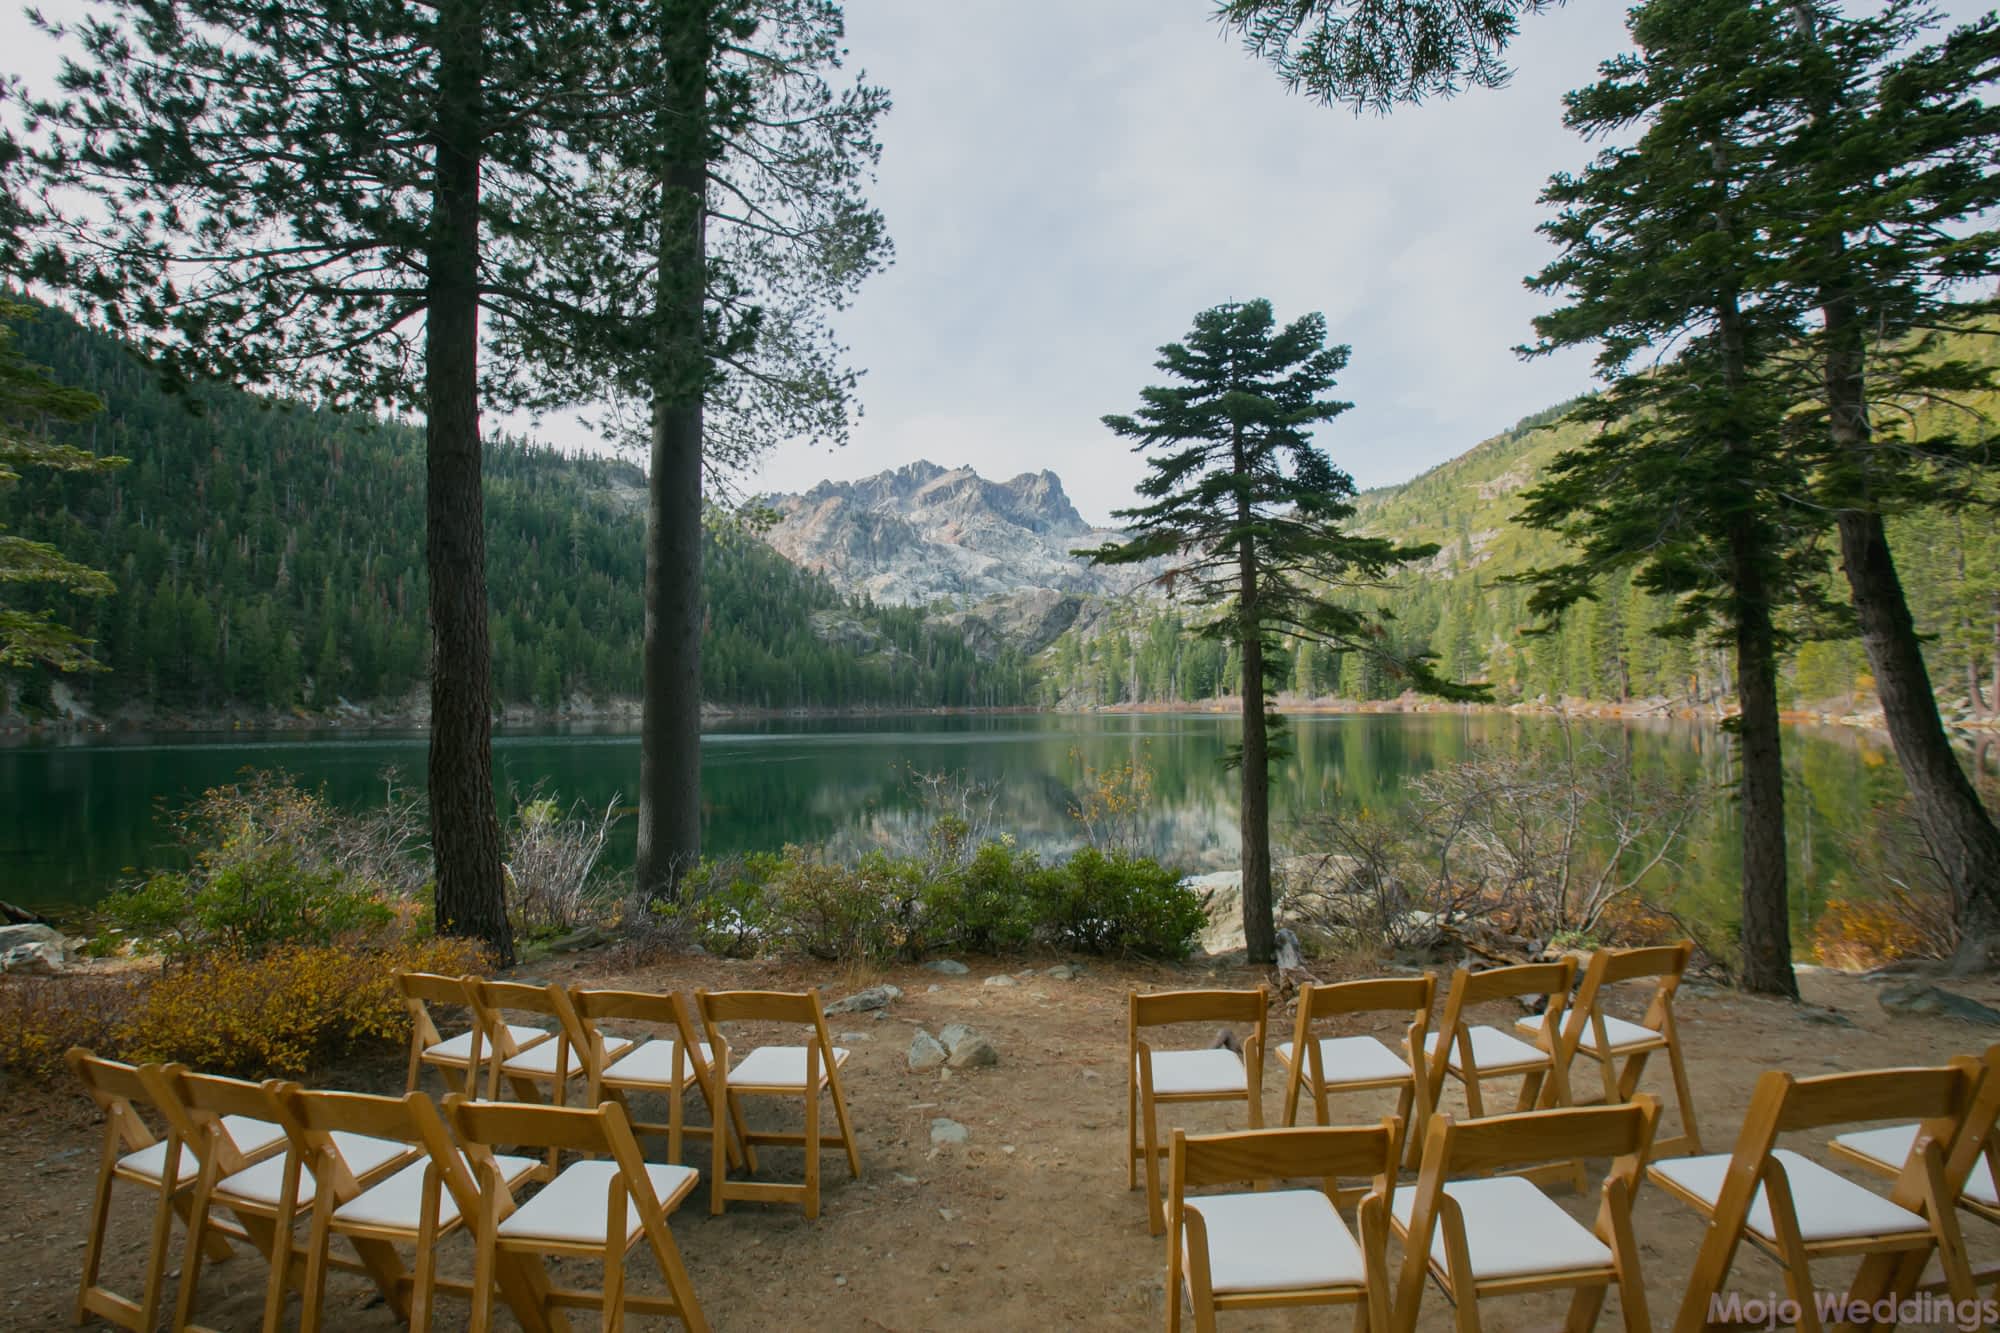 Chairs are set up for a wedding ceremony in front of a lake and pine trees.